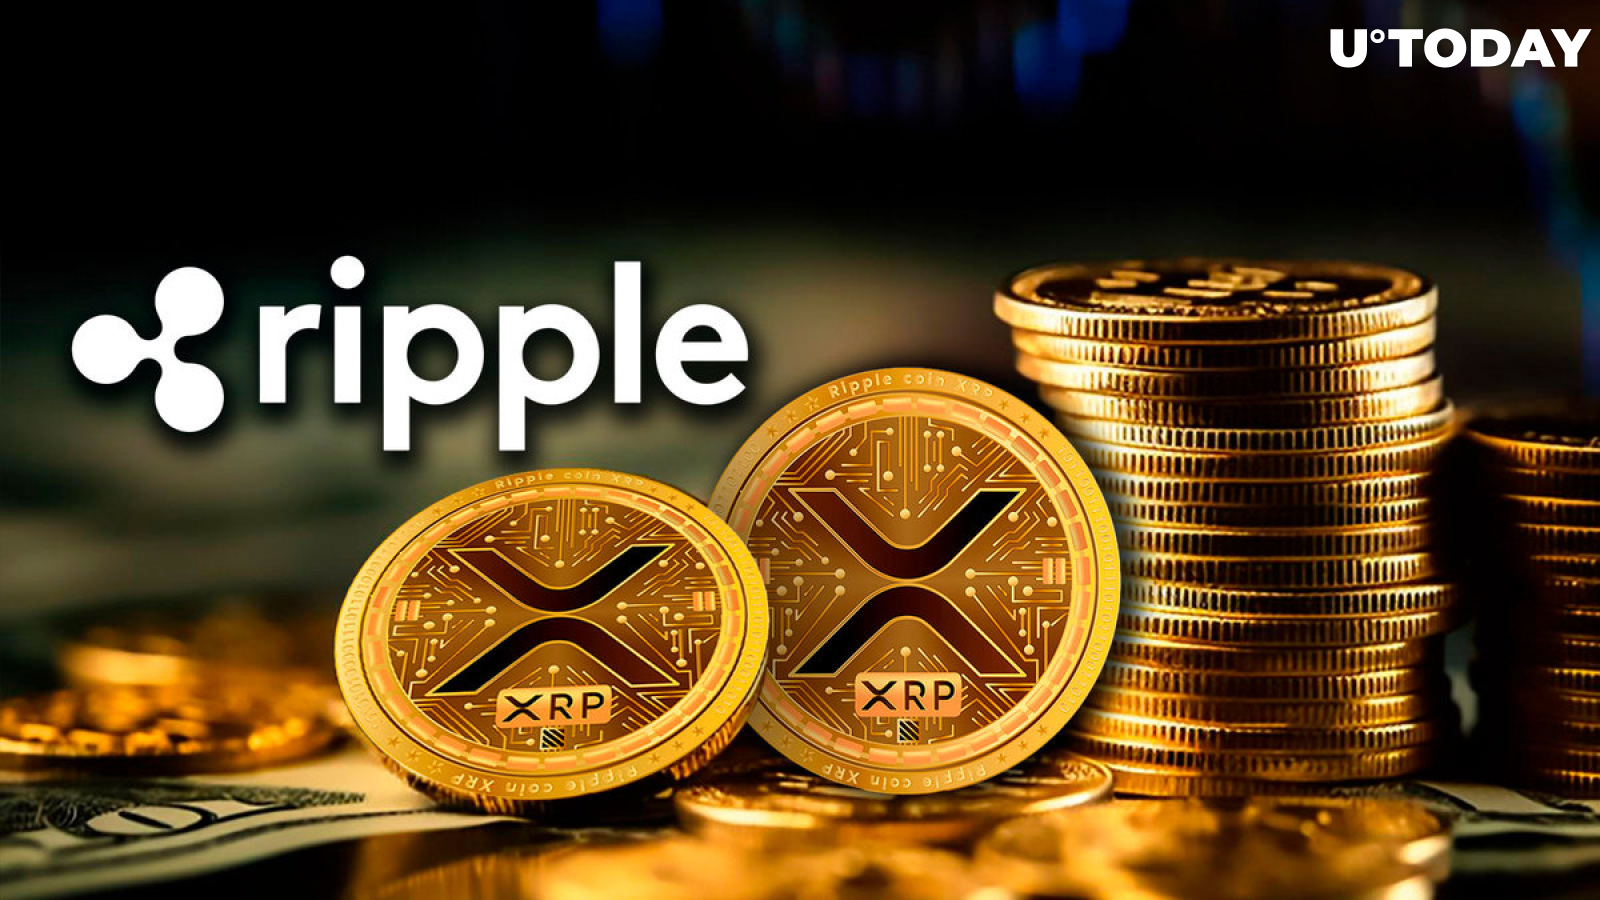 1 Billion XRP Unlocked by Ripple, XRP Price Reacts With 3% Drop